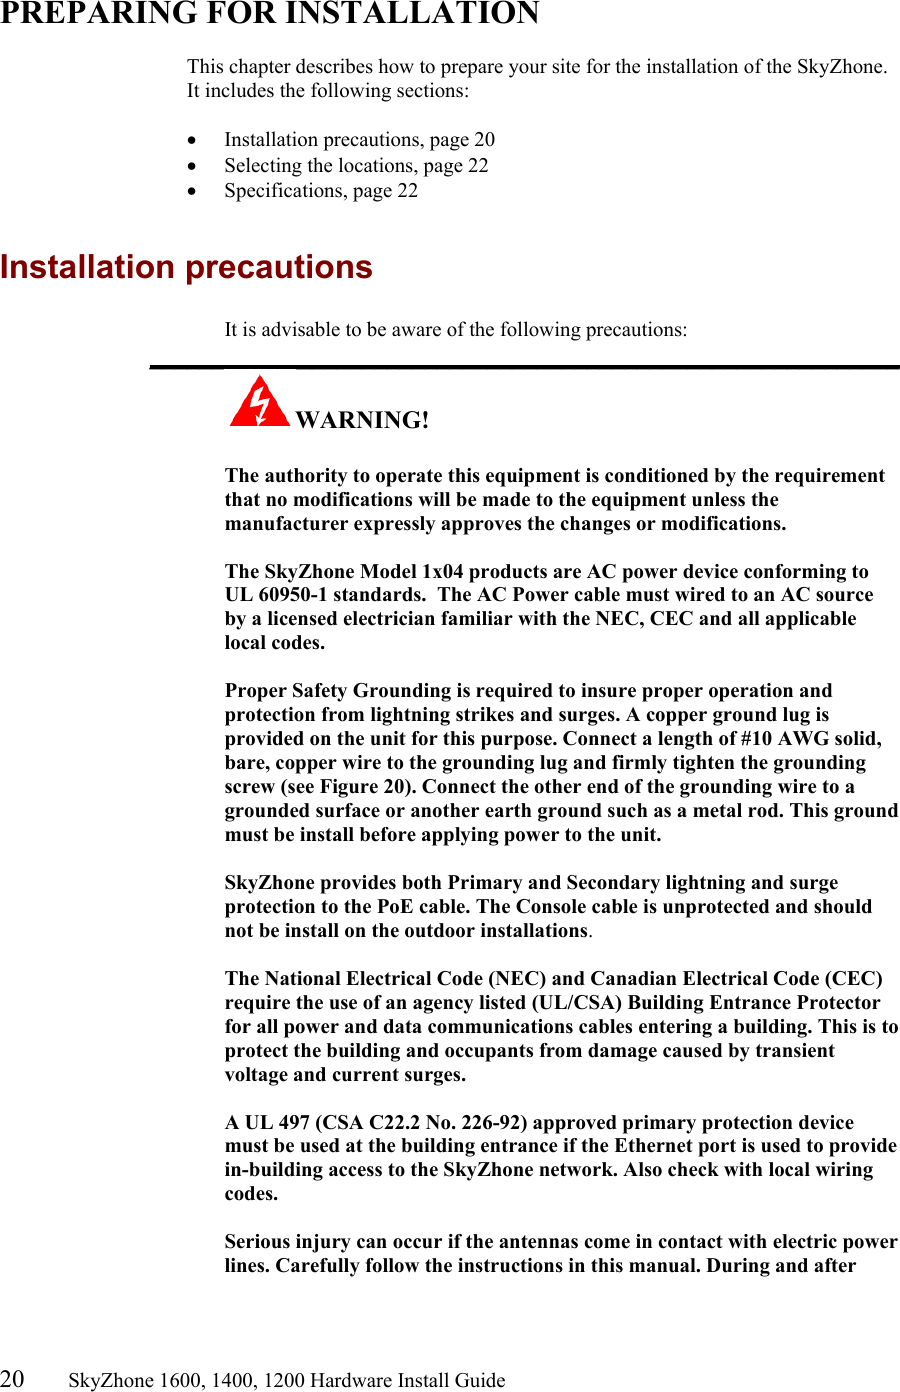 20       SkyZhone 1600, 1400, 1200 Hardware Install Guide           PREPARING FOR INSTALLATION  This chapter describes how to prepare your site for the installation of the SkyZhone. It includes the following sections:  •  Installation precautions, page 20 •  Selecting the locations, page 22 •  Specifications, page 22  Installation precautions It is advisable to be aware of the following precautions: ____________________________________________________________ WARNING!      The authority to operate this equipment is conditioned by the requirement that no modifications will be made to the equipment unless the manufacturer expressly approves the changes or modifications.  The SkyZhone Model 1x04 products are AC power device conforming to UL 60950-1 standards.  The AC Power cable must wired to an AC source by a licensed electrician familiar with the NEC, CEC and all applicable local codes.  Proper Safety Grounding is required to insure proper operation and protection from lightning strikes and surges. A copper ground lug is provided on the unit for this purpose. Connect a length of #10 AWG solid, bare, copper wire to the grounding lug and firmly tighten the grounding screw (see Figure 20). Connect the other end of the grounding wire to a grounded surface or another earth ground such as a metal rod. This ground must be install before applying power to the unit.  SkyZhone provides both Primary and Secondary lightning and surge protection to the PoE cable. The Console cable is unprotected and should not be install on the outdoor installations.  The National Electrical Code (NEC) and Canadian Electrical Code (CEC) require the use of an agency listed (UL/CSA) Building Entrance Protector for all power and data communications cables entering a building. This is to protect the building and occupants from damage caused by transient voltage and current surges.   A UL 497 (CSA C22.2 No. 226-92) approved primary protection device must be used at the building entrance if the Ethernet port is used to provide in-building access to the SkyZhone network. Also check with local wiring codes.  Serious injury can occur if the antennas come in contact with electric power lines. Carefully follow the instructions in this manual. During and after 